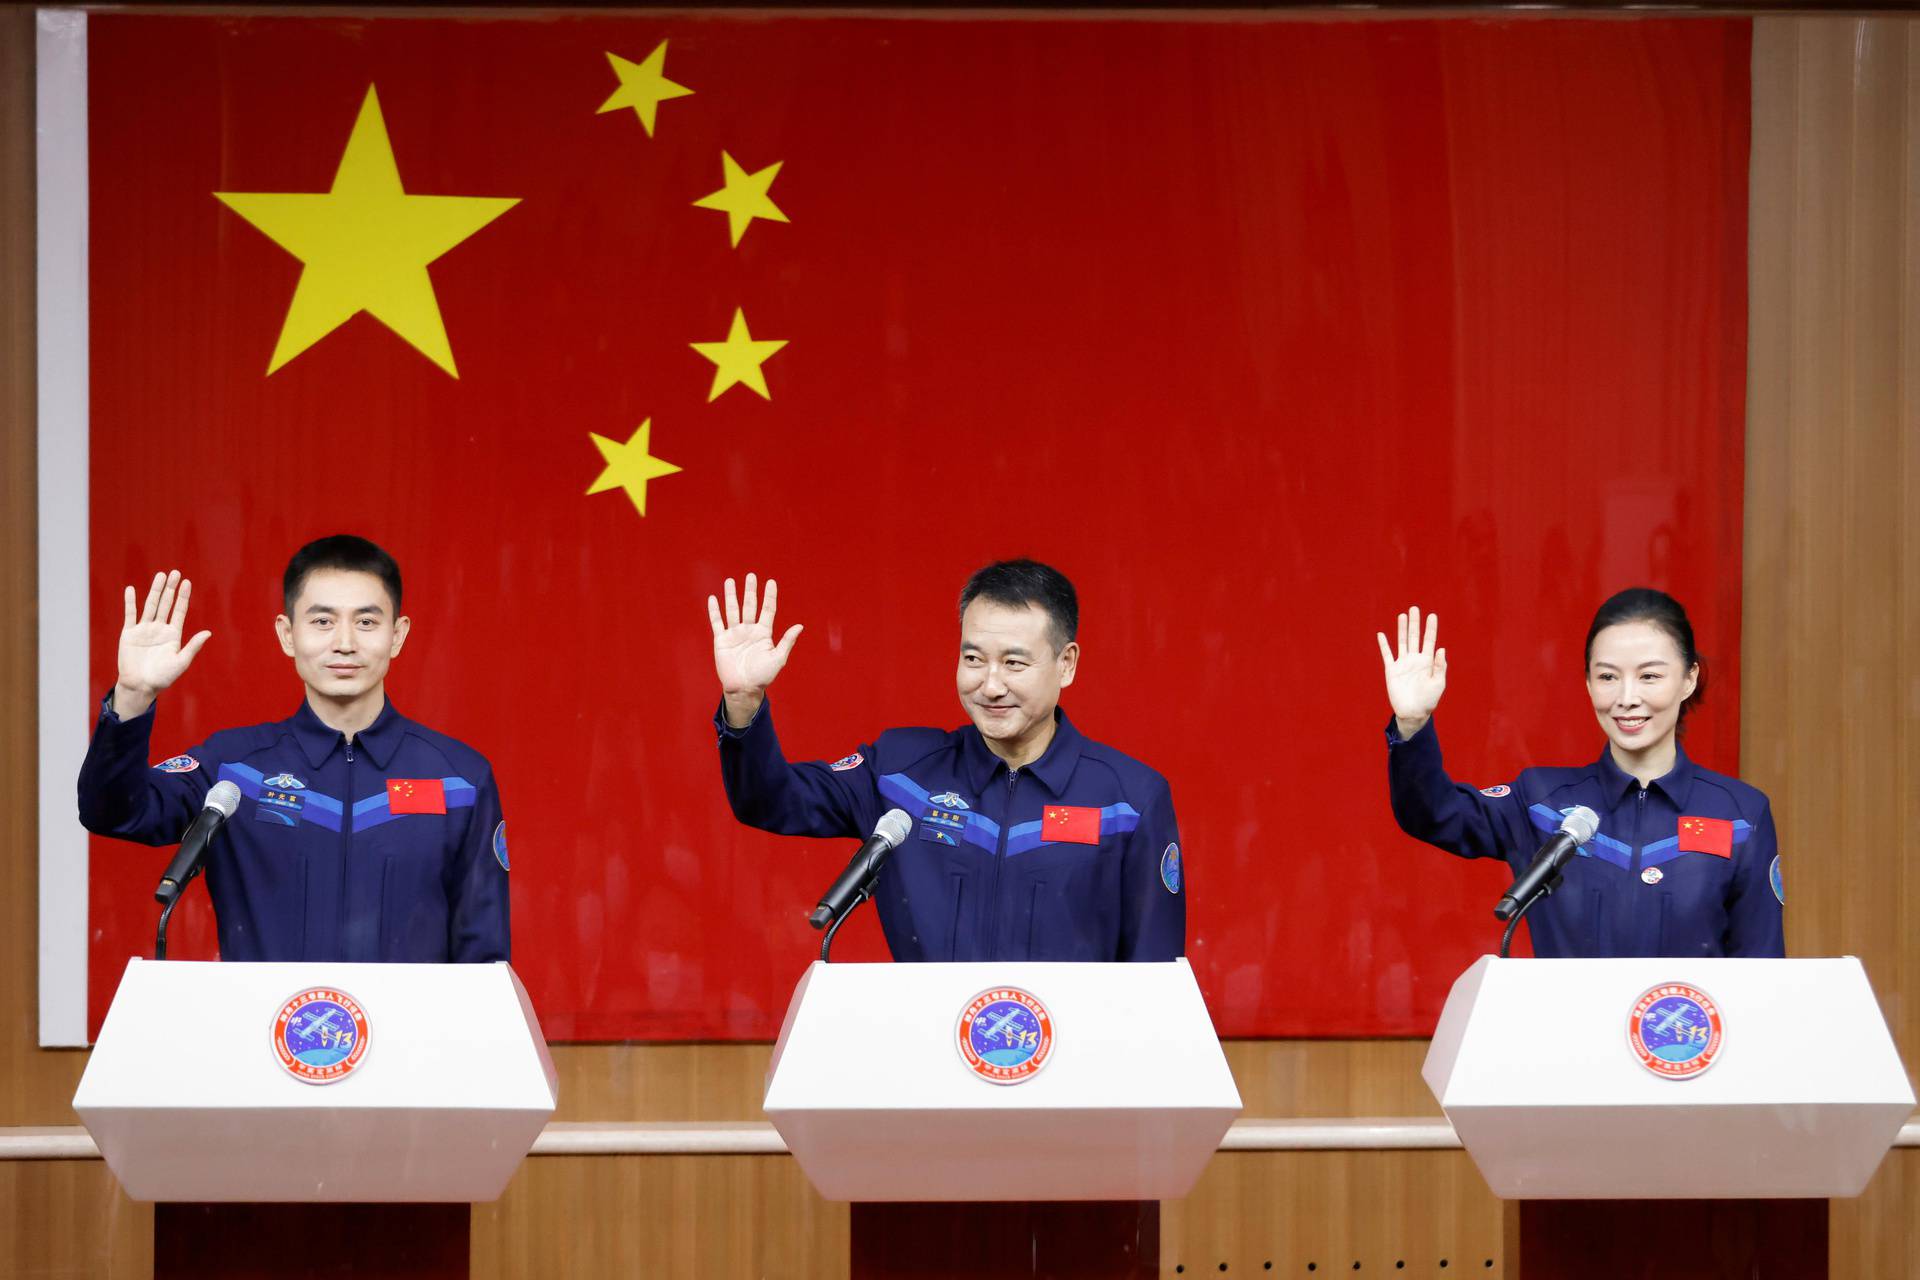 News conference before the launch of Long March-2F Y13 rocket, near Jiuquan